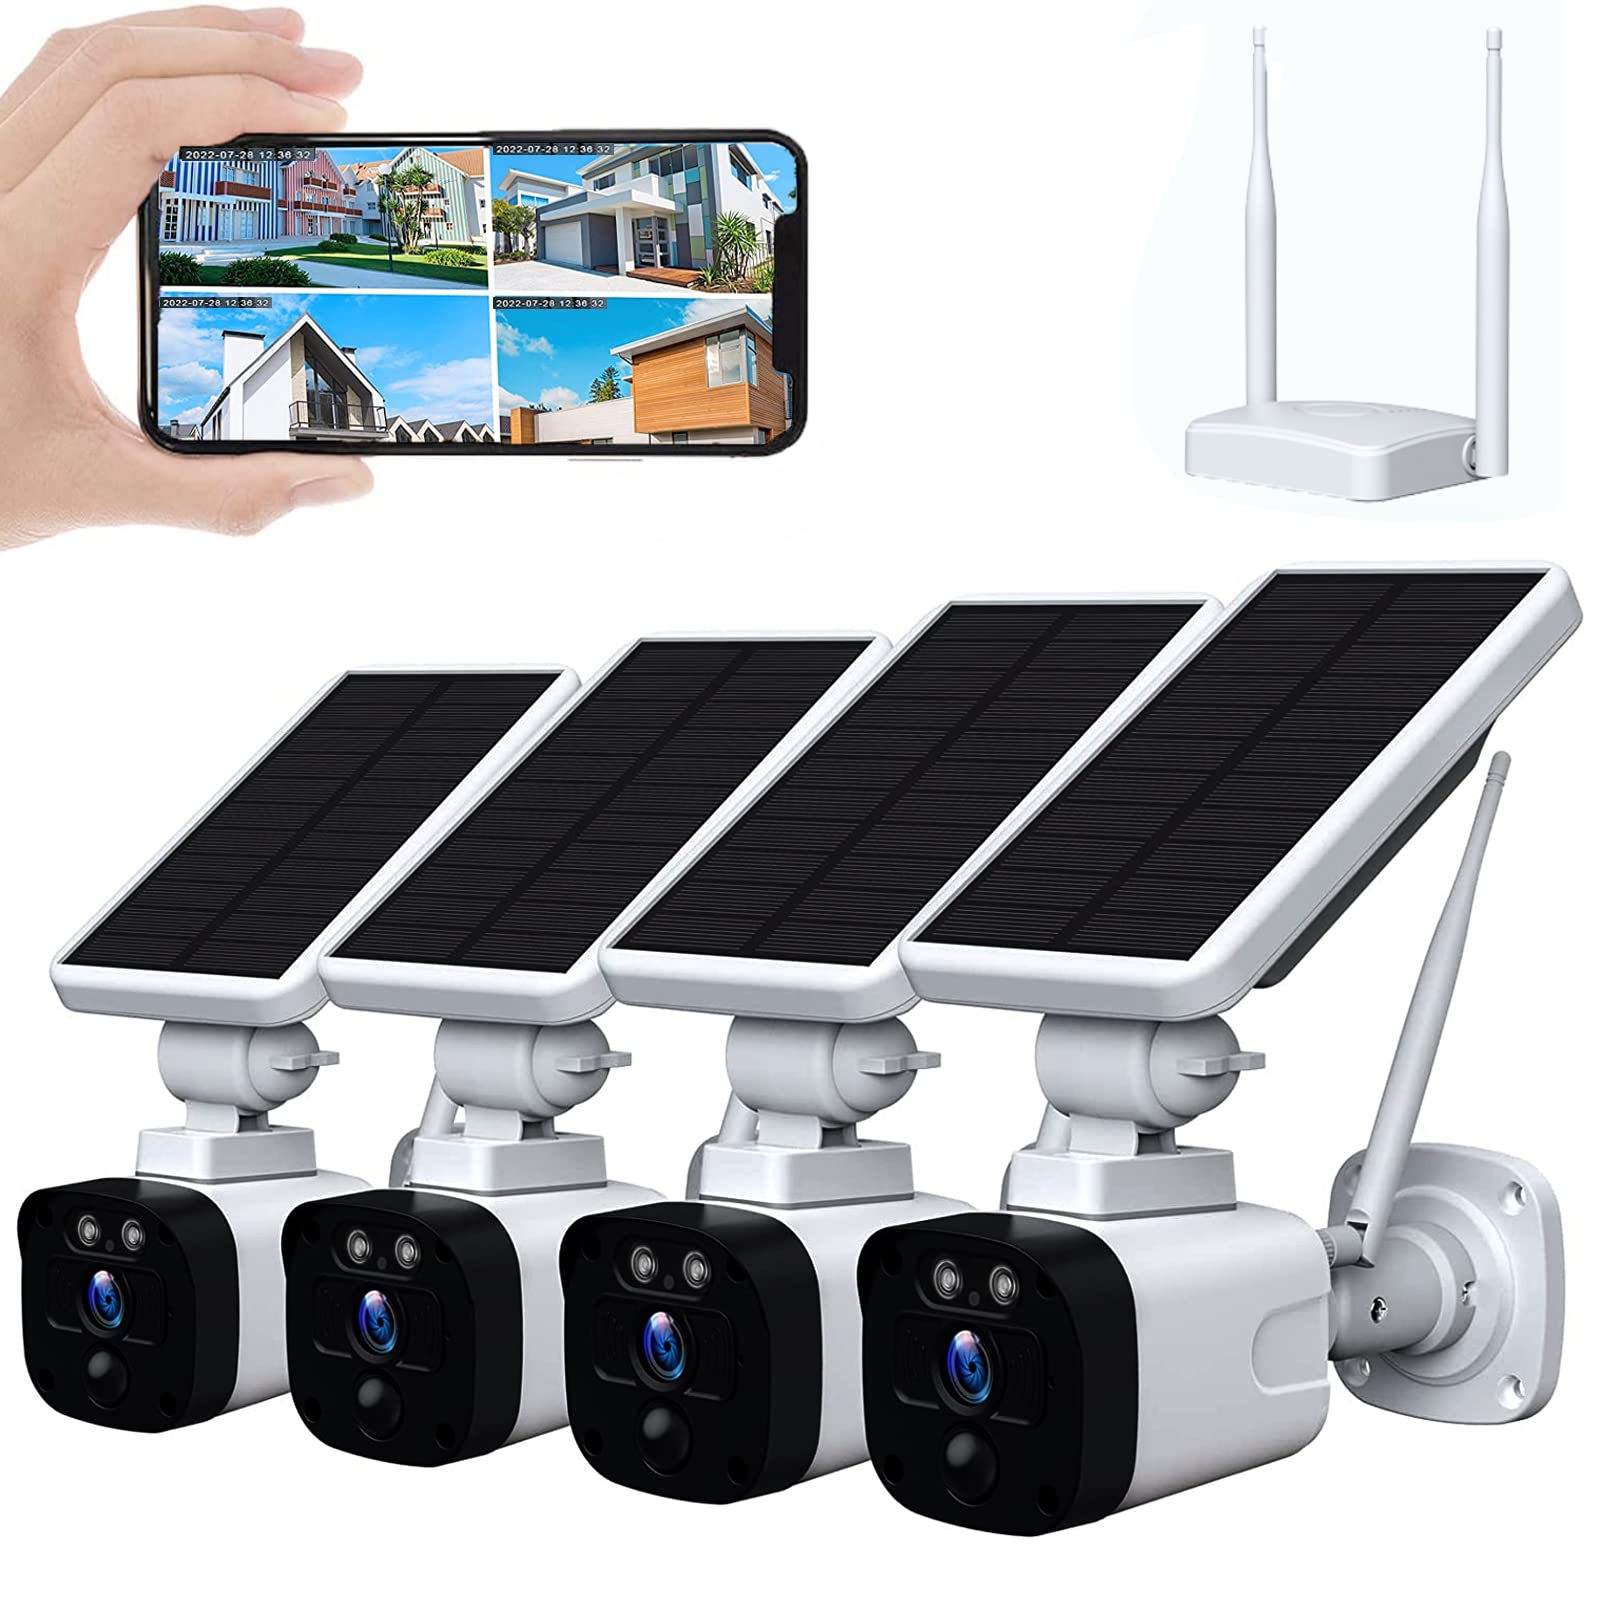 CAMCAMP Wireless Solar Security camera Outdoor,Solar Home Security camera System, Forever Power,100% Wire-Free,1080P Night Vision camera